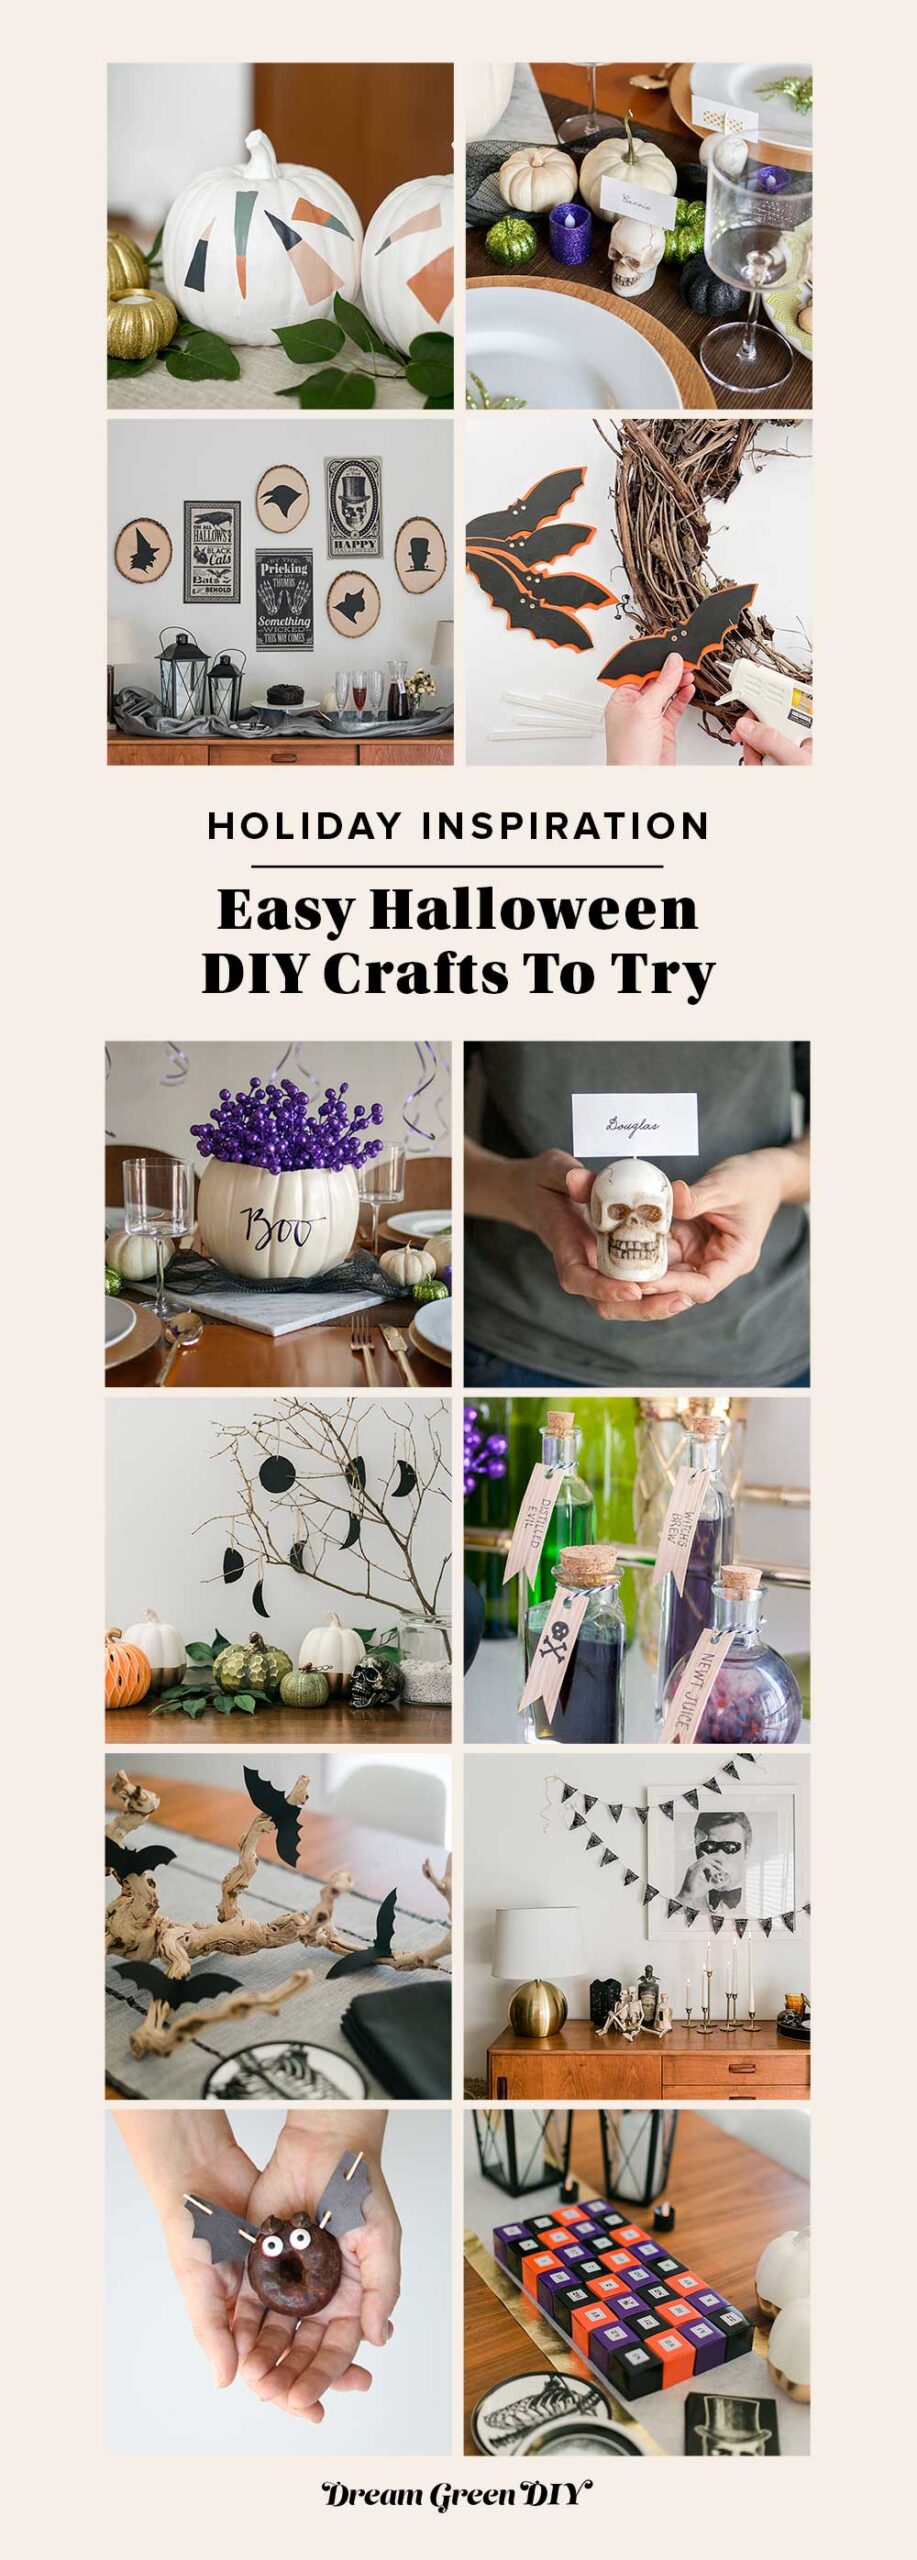 Easy Halloween DIY Crafts To Try